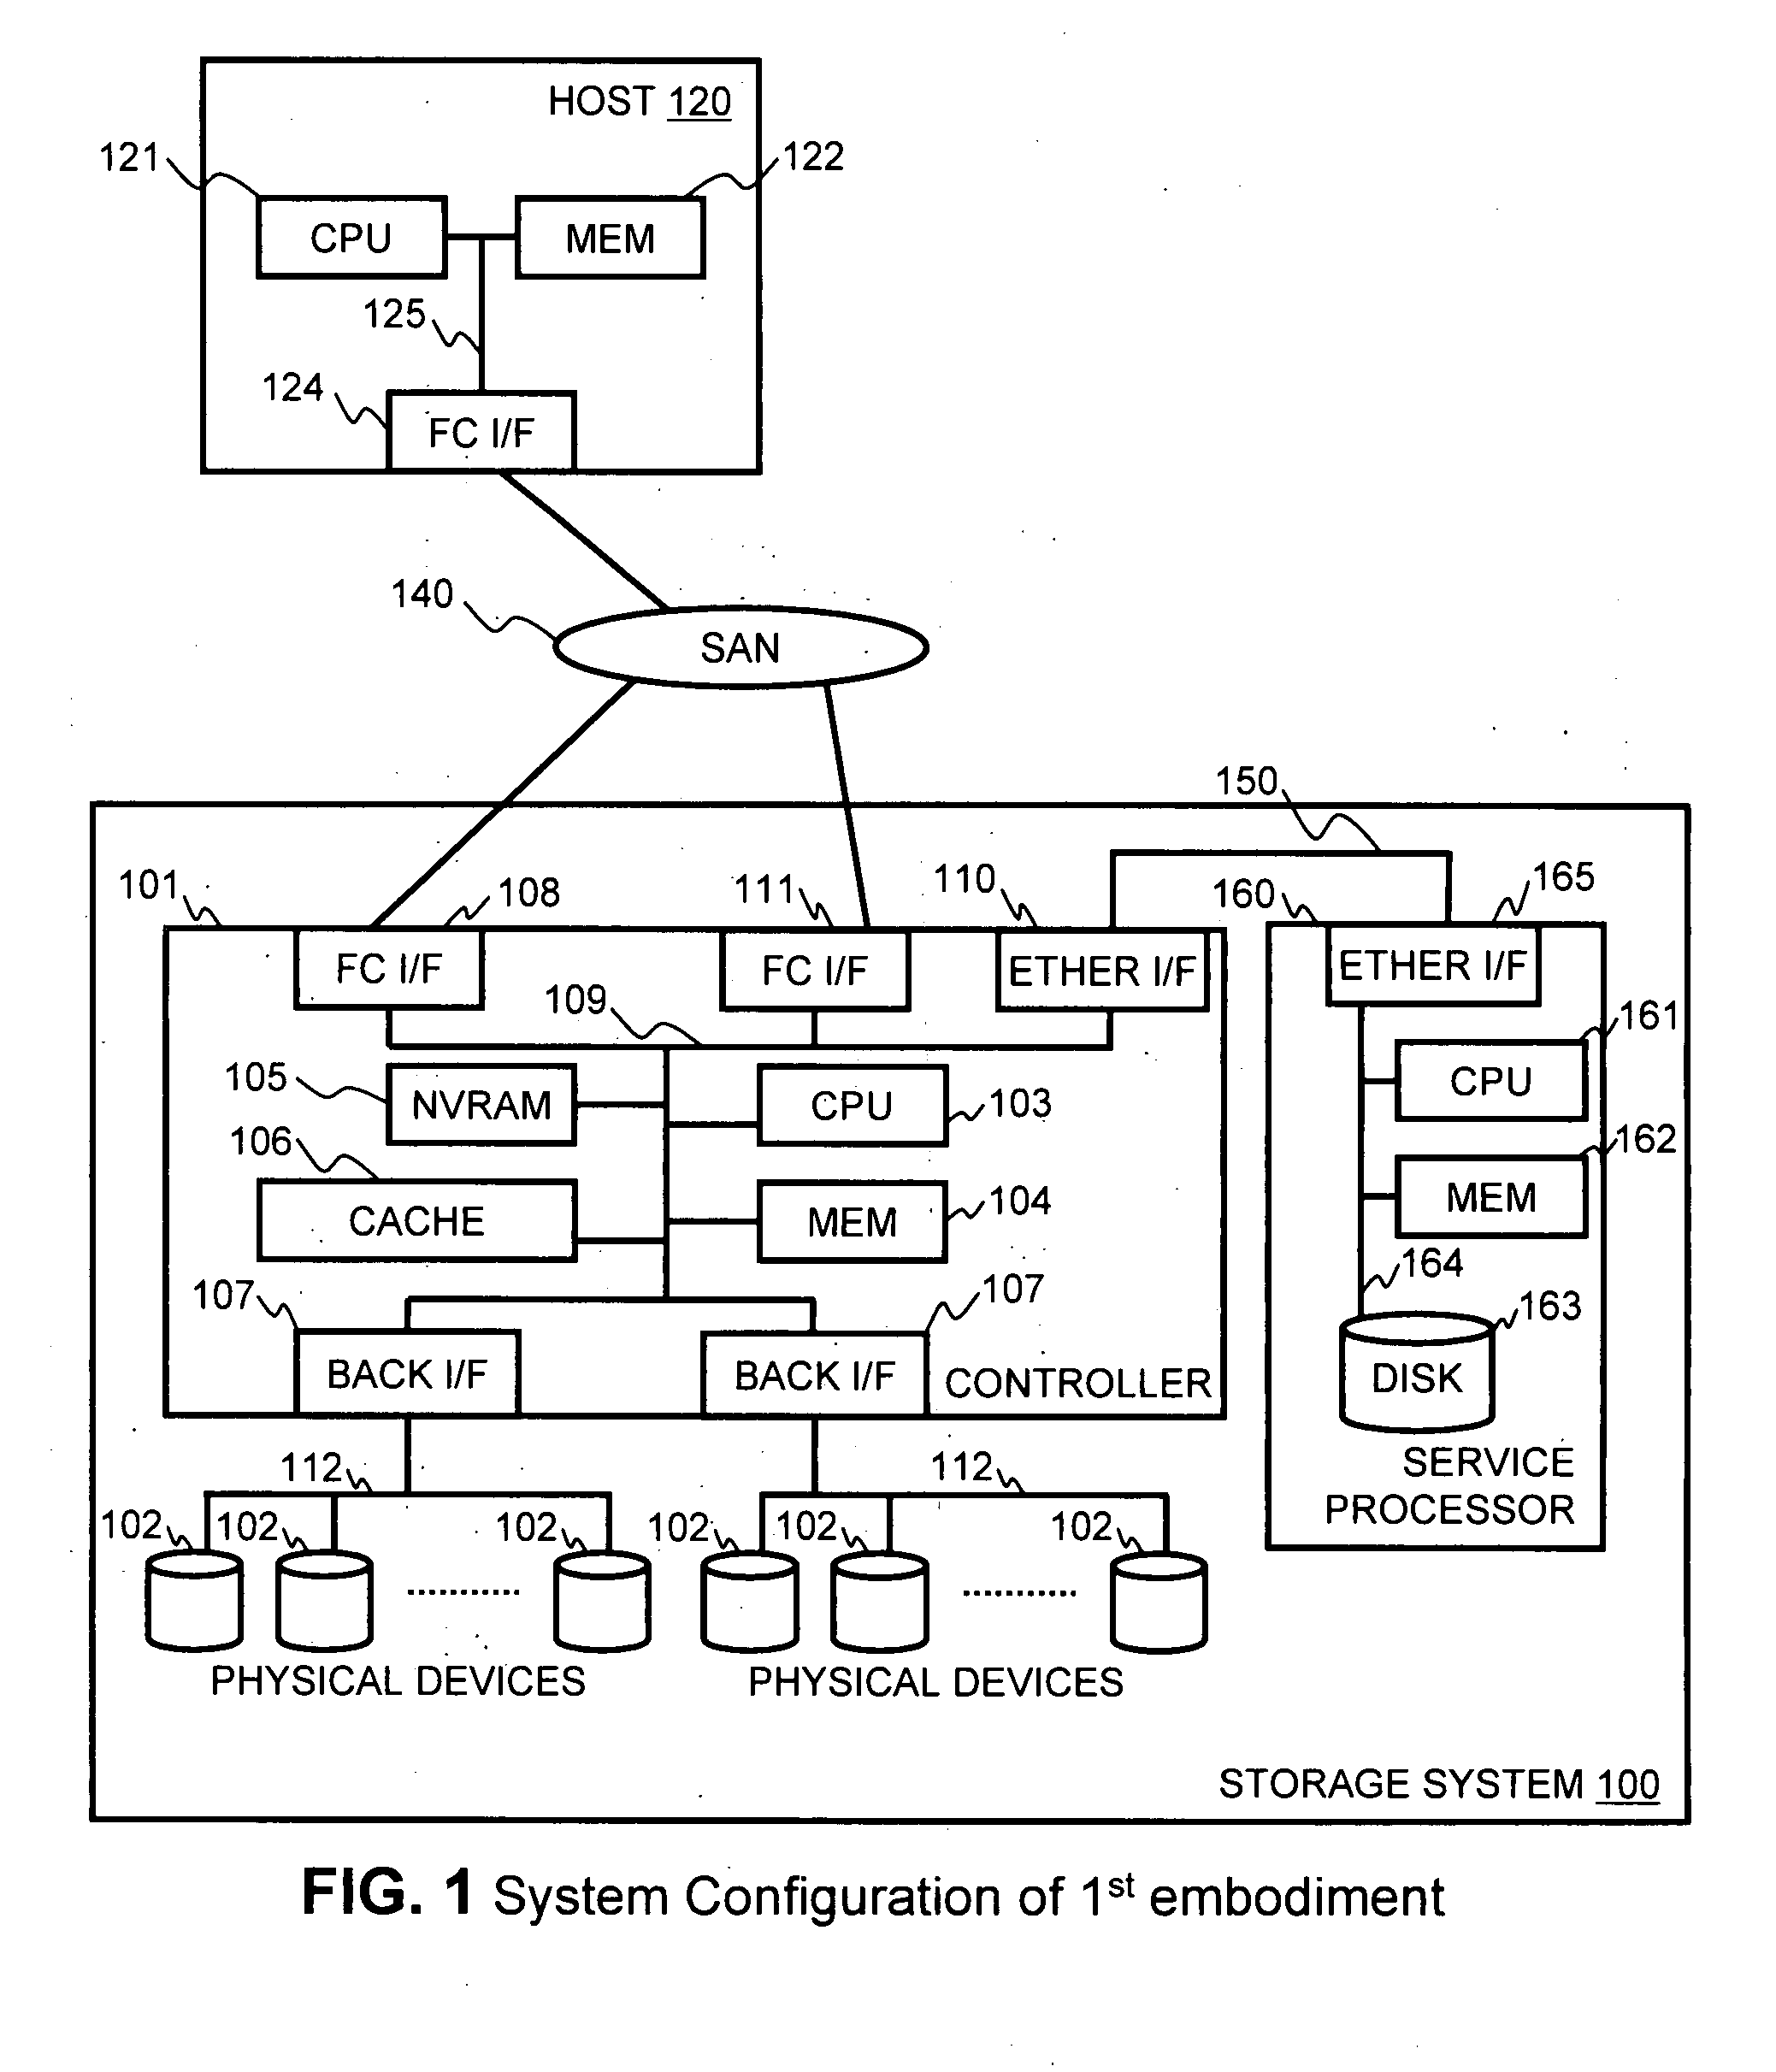 Method and apparatus for managing virtual ports on storage systems